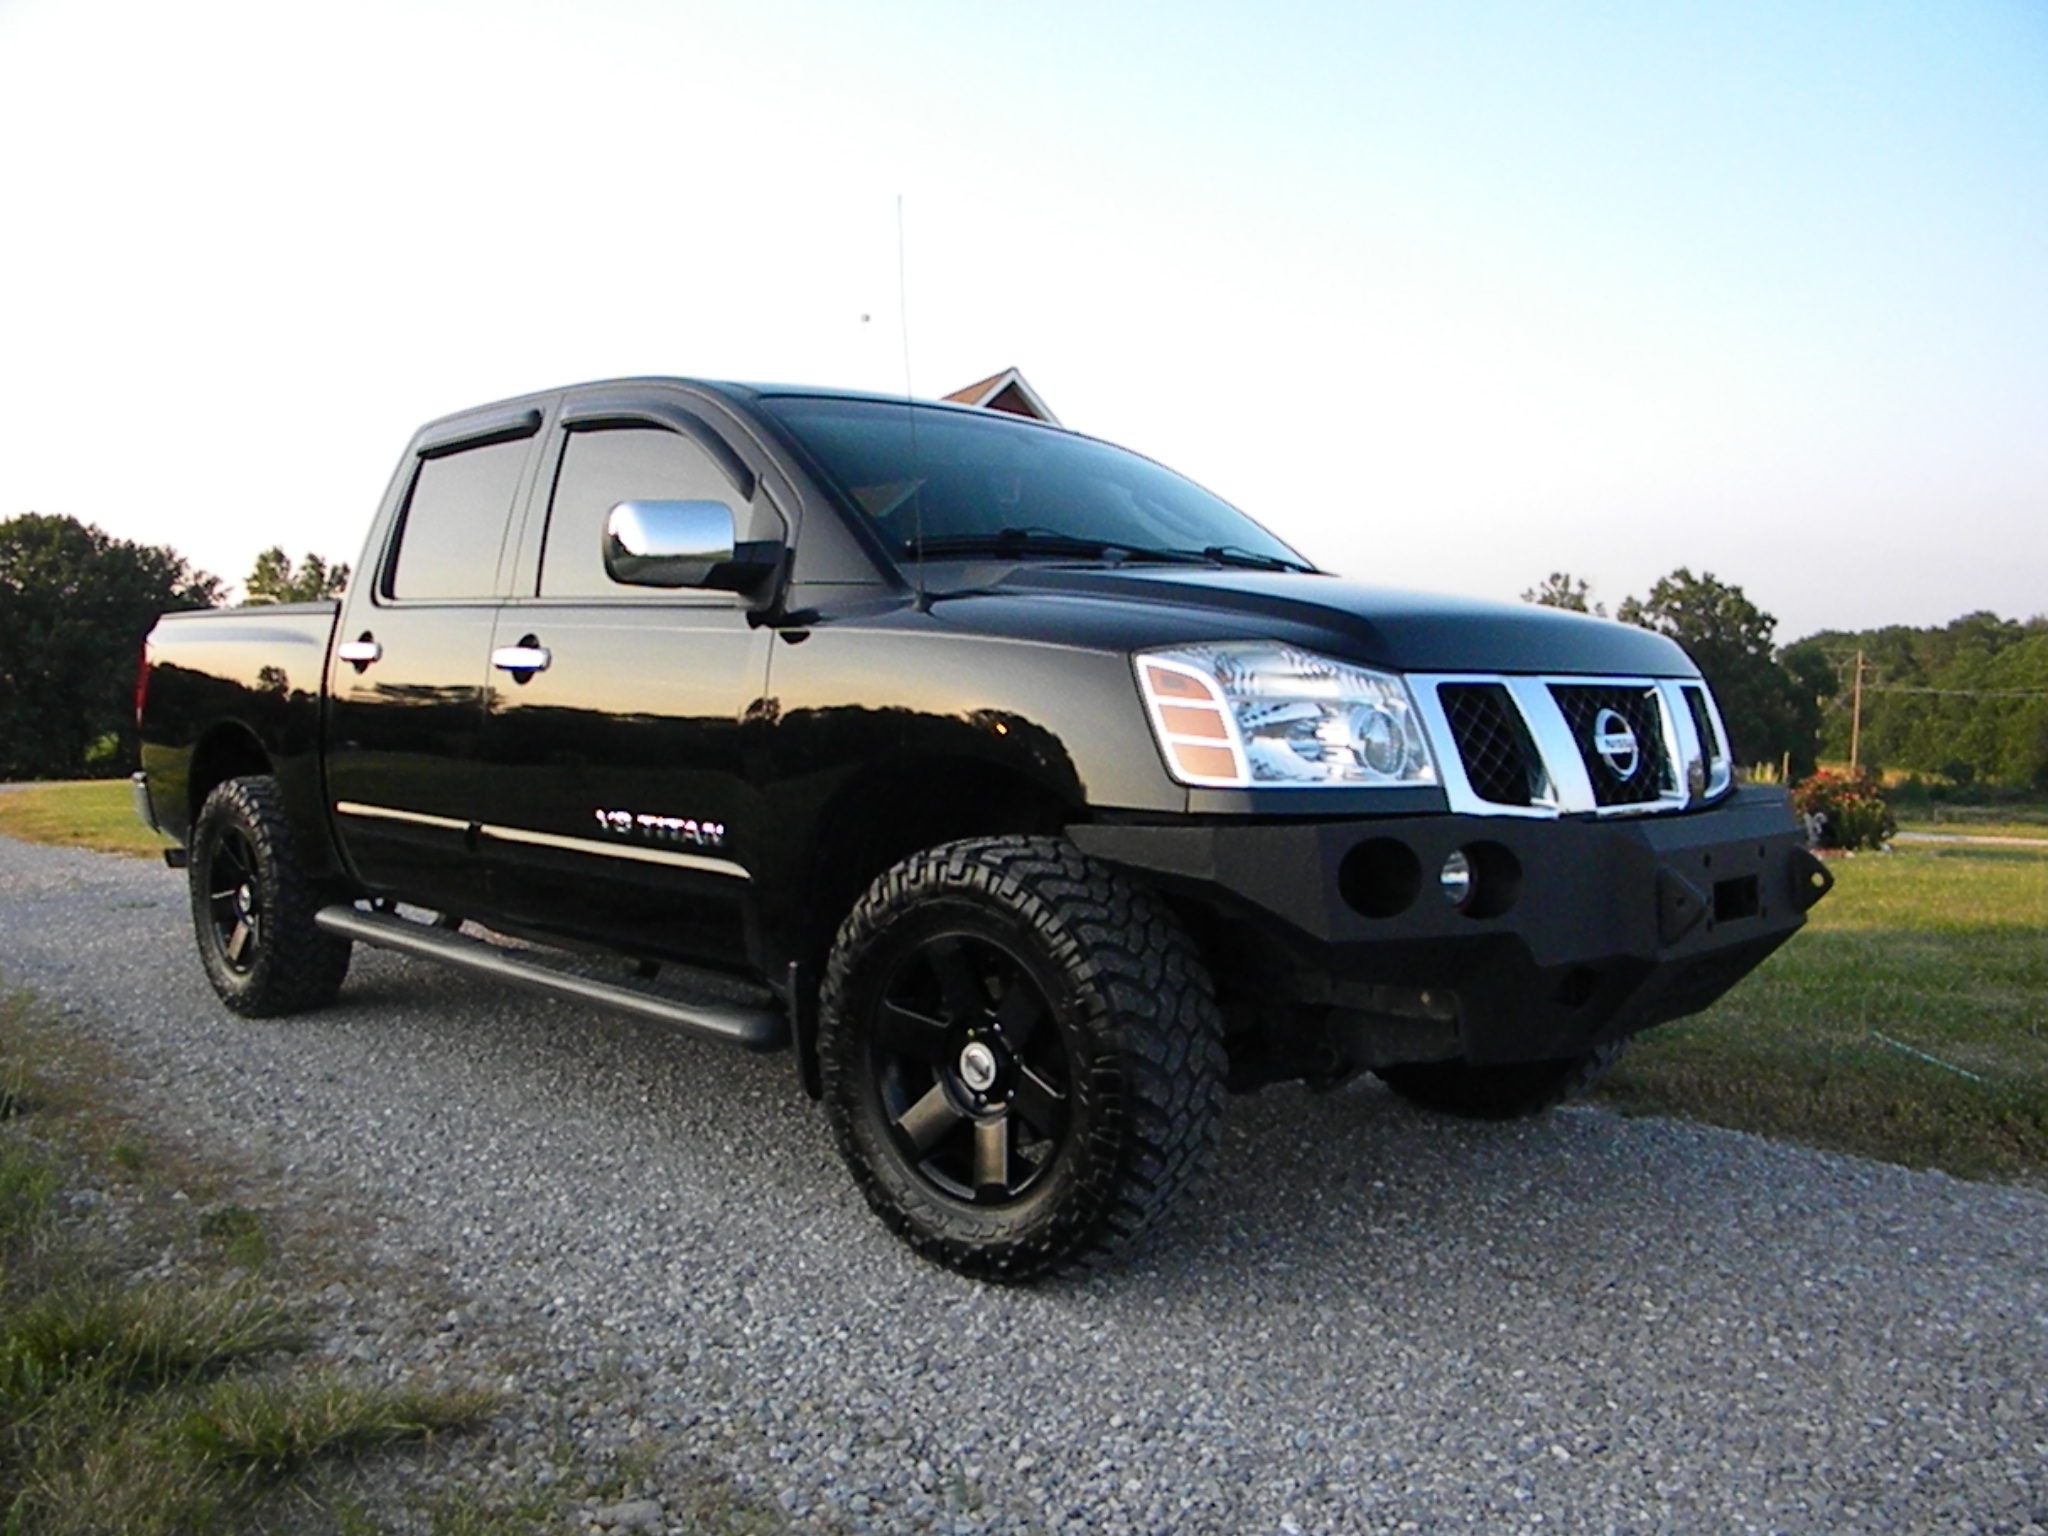 Attorney for nissan titan owners #2